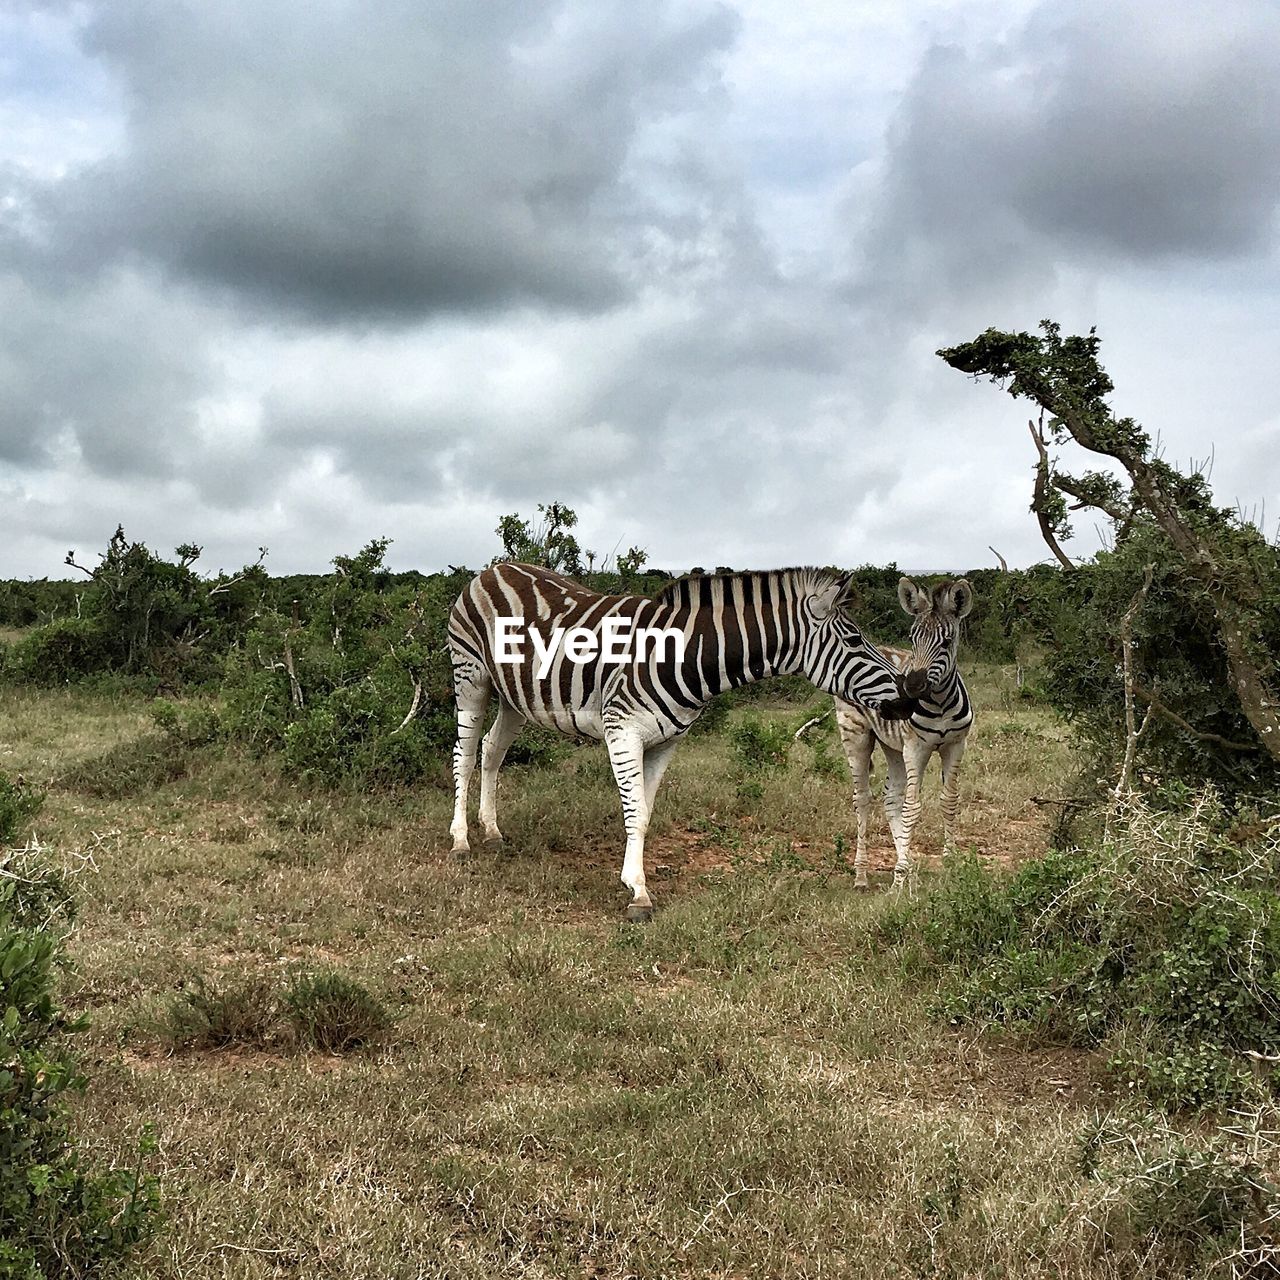 Zebras standing on field against cloudy sky